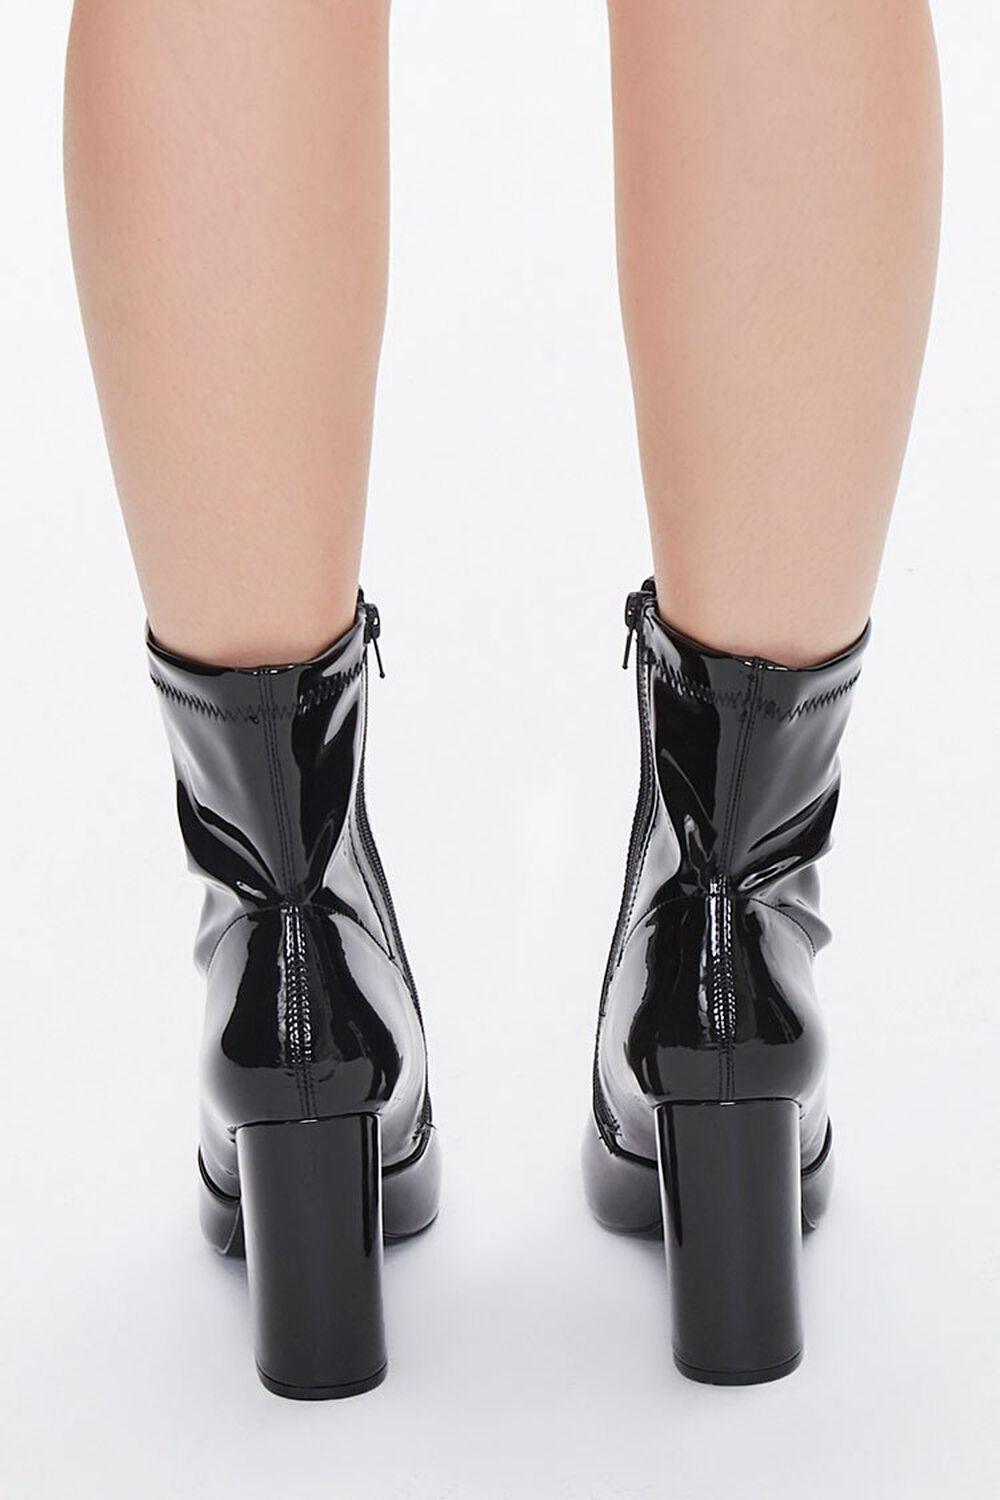 Faux Patent Leather Sock Booties, image 3